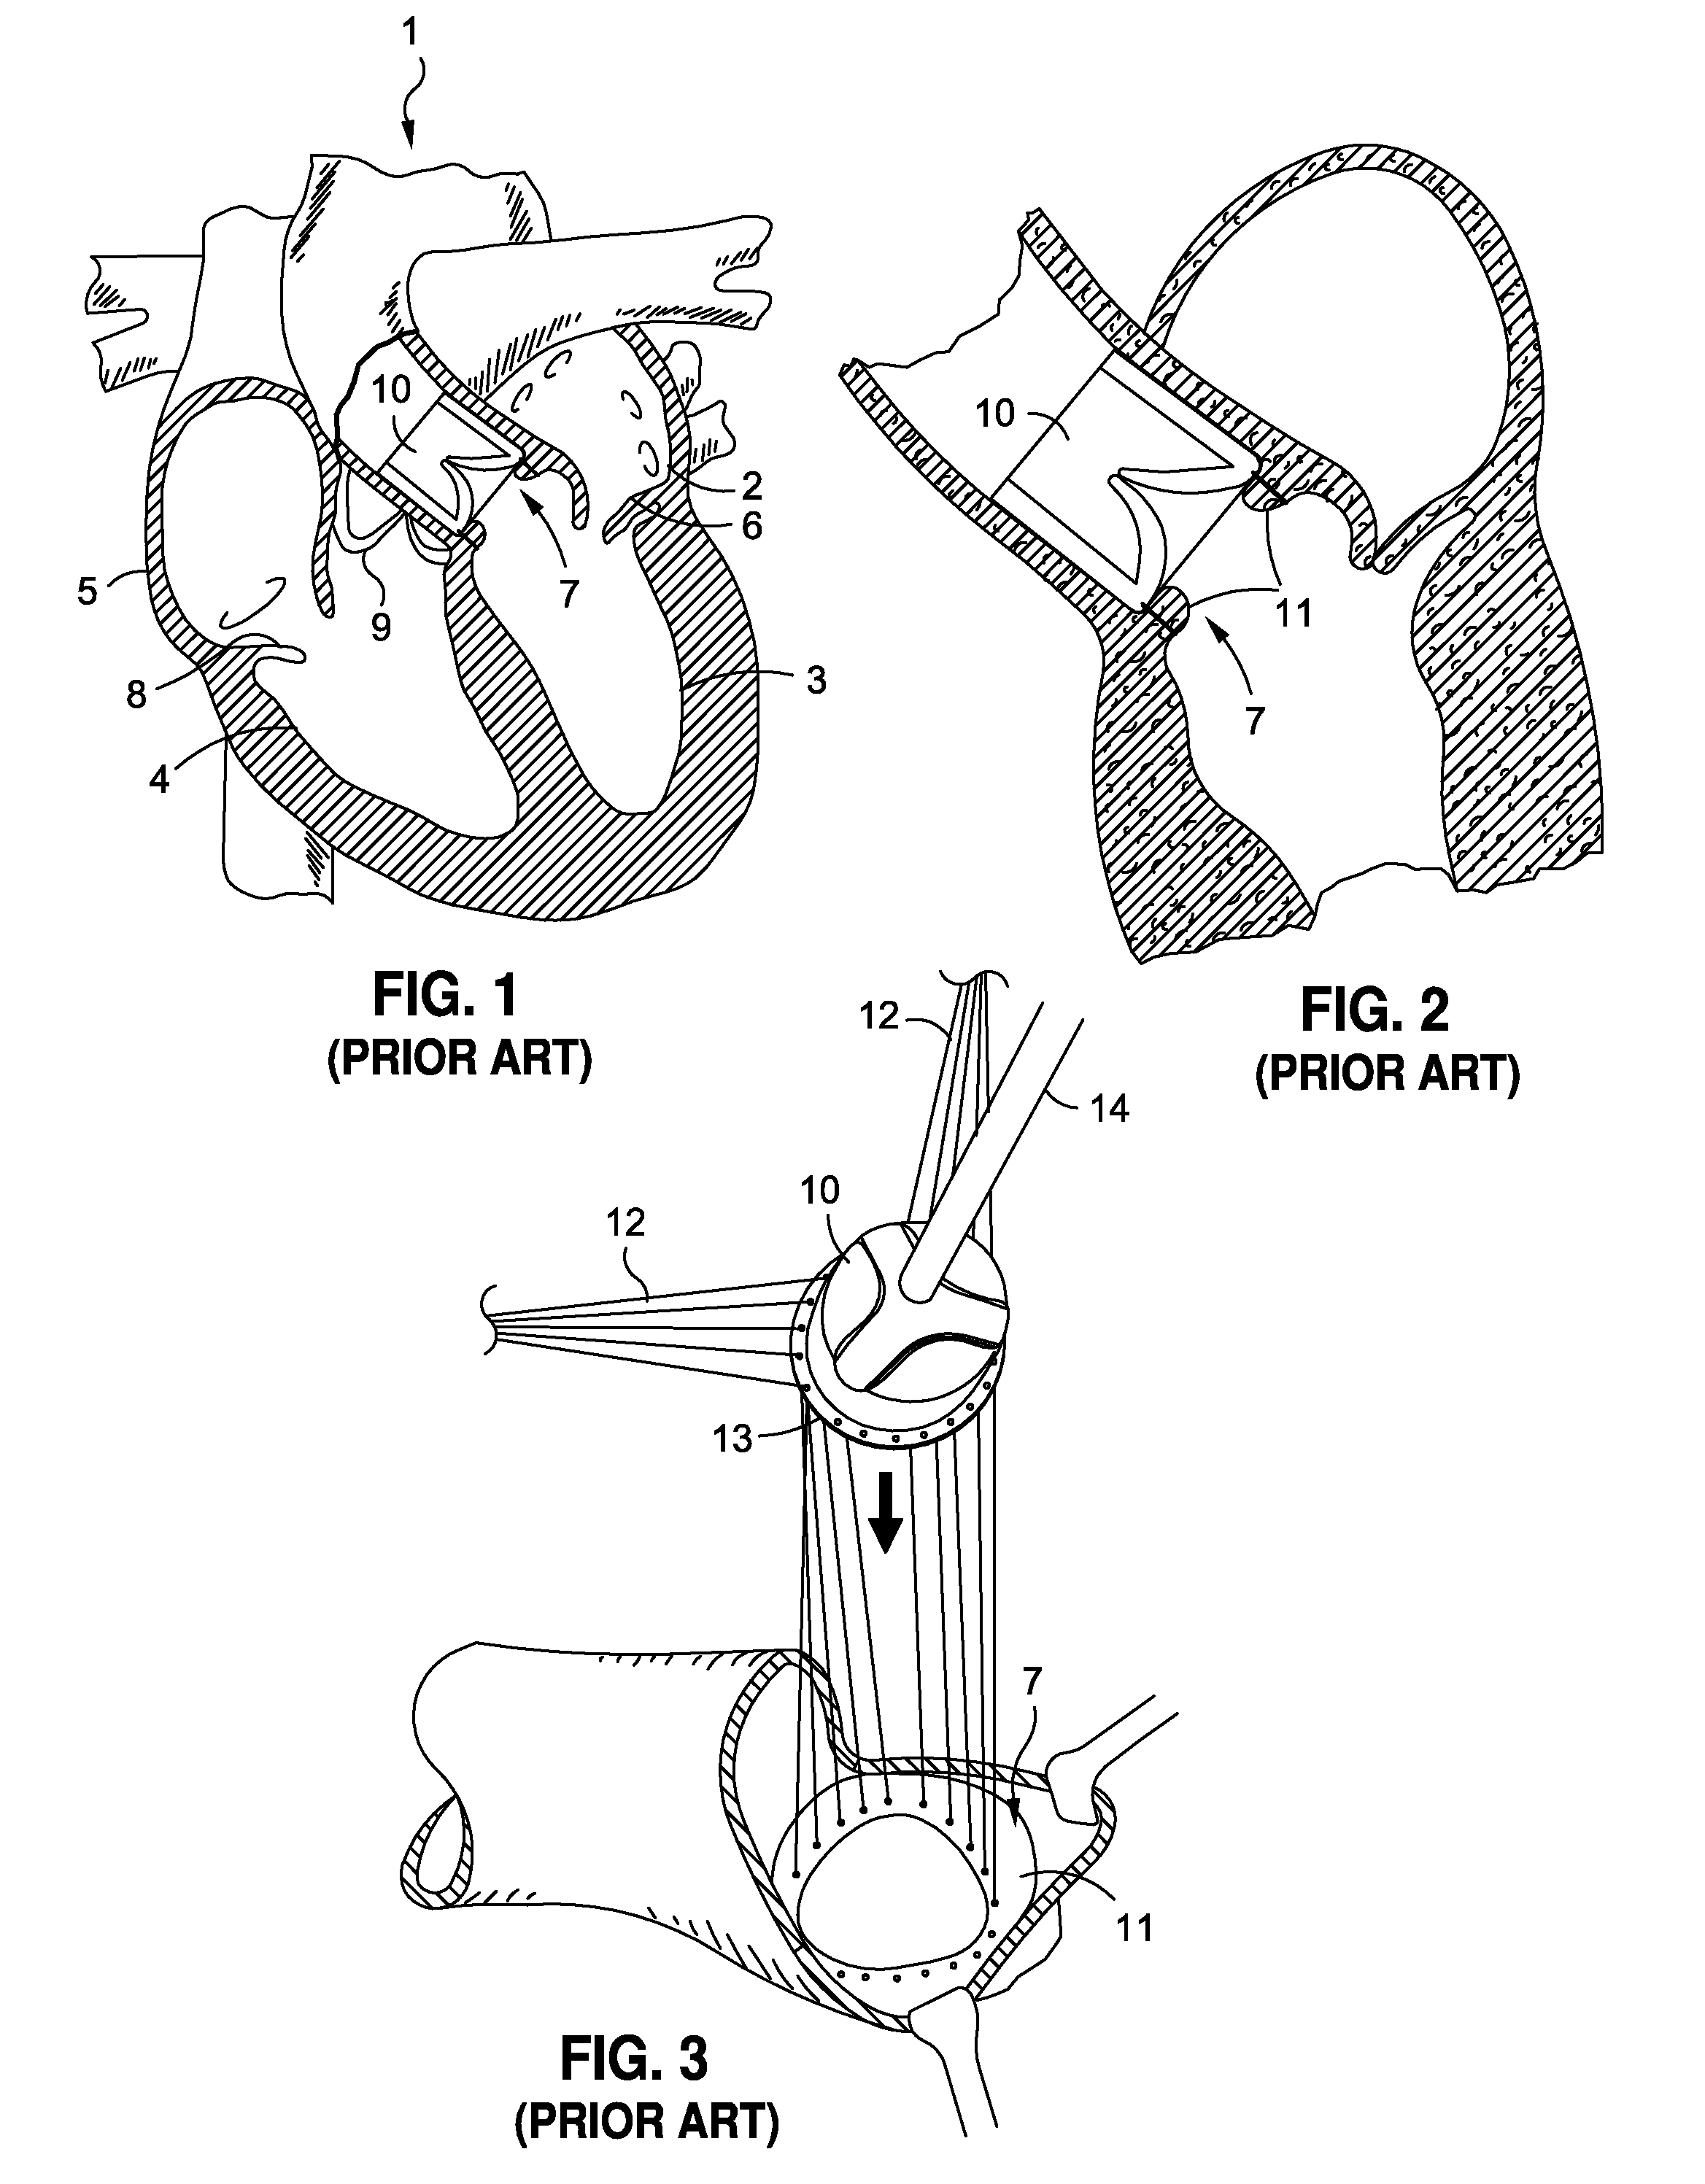 Heart valve prosthesis anchoring device and methods